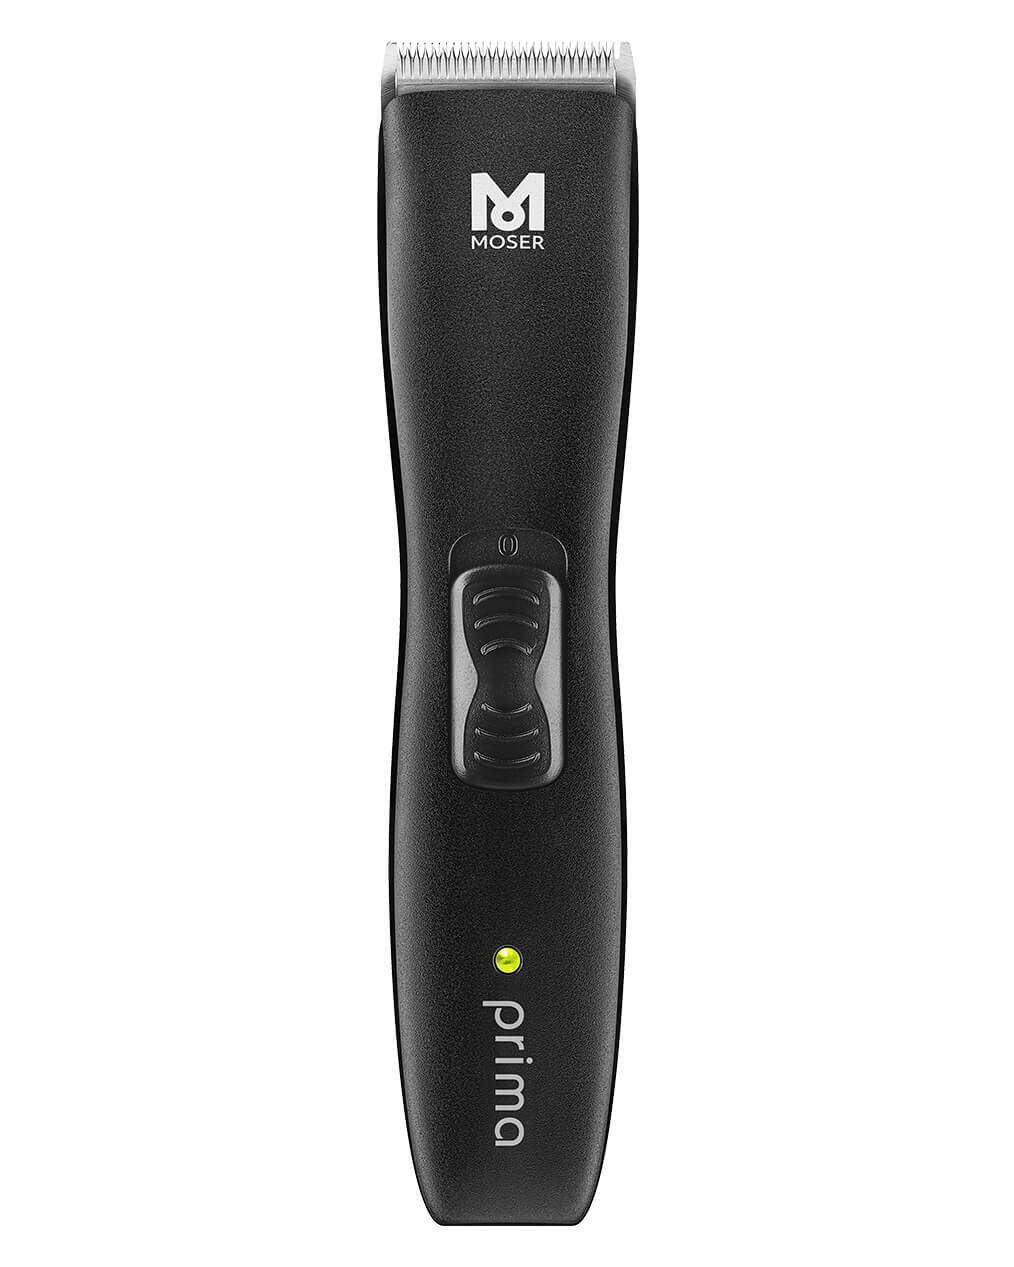 MOSER PRIMA,CORDLESS ANIMAL TRIMMER FOR ALL FINE WORK ON FACE, EARS, PAWS GENITAL AREA, 1586-0060